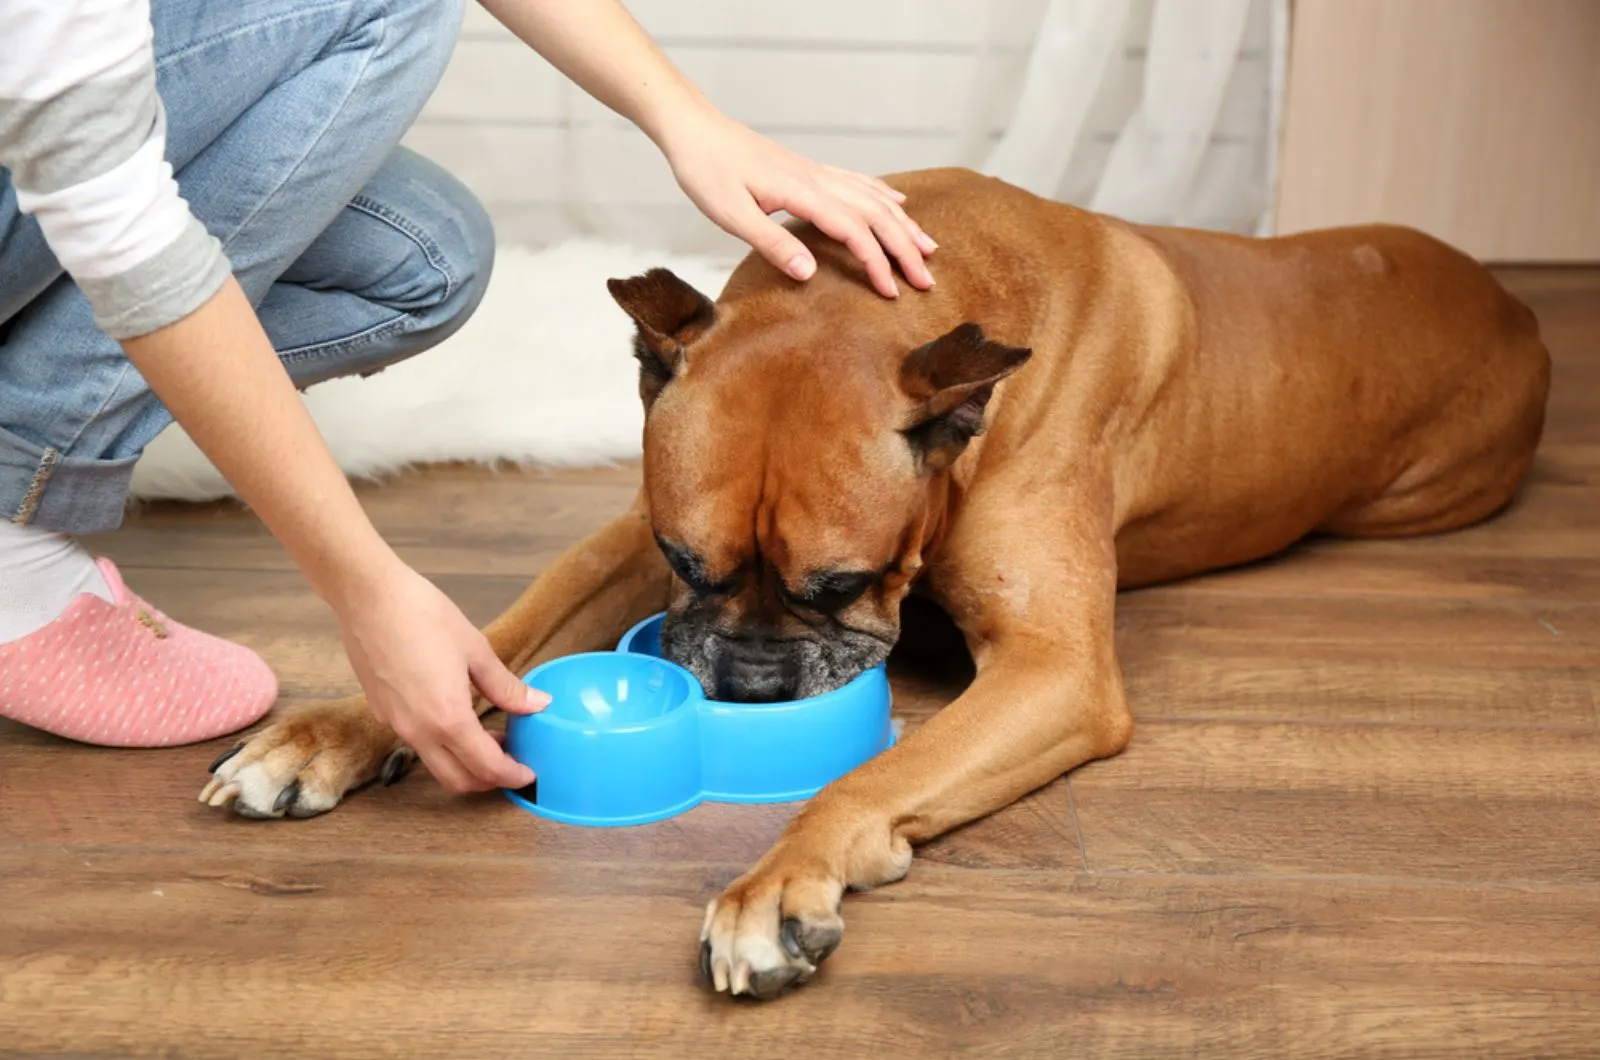 dog eating from a bowl while woman cuddling him